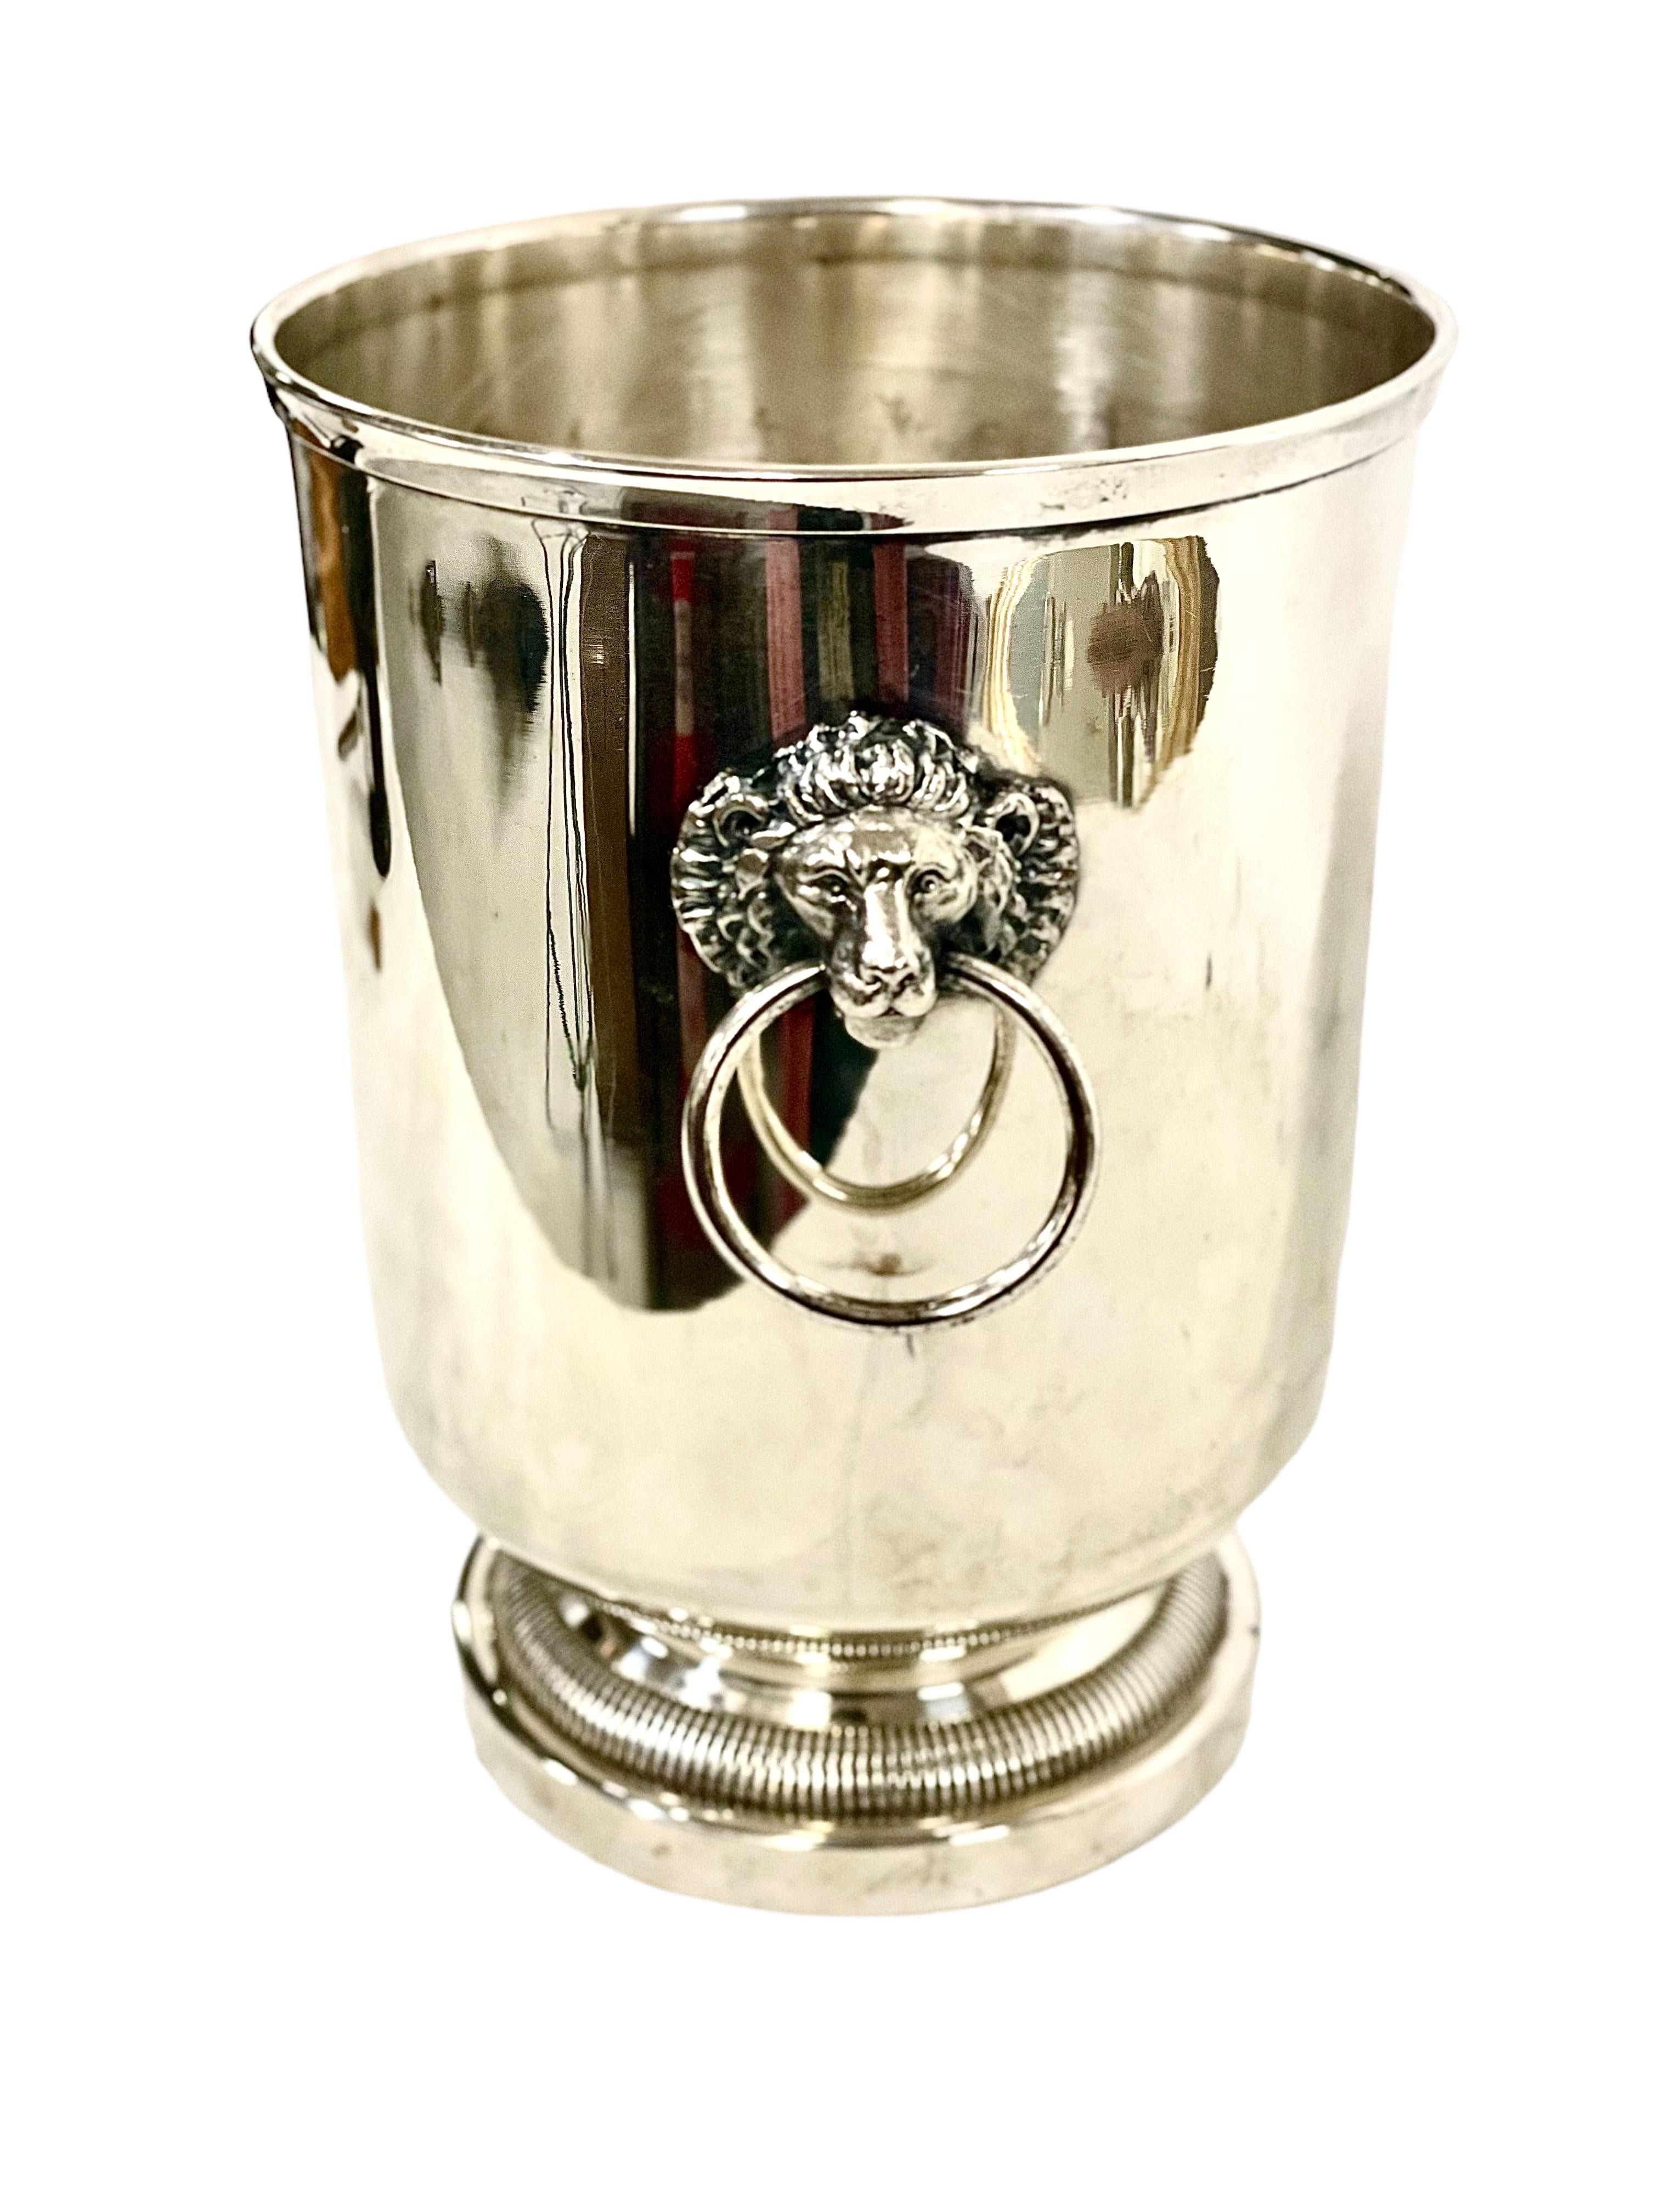 A gleaming and classically shaped Champagne bucket, or cooler, with lion's head ring handles, and a sturdy and attractively shaped base. Silver plated, with its beautiful original patina, this cooler has some vintage wear in the form of some slight